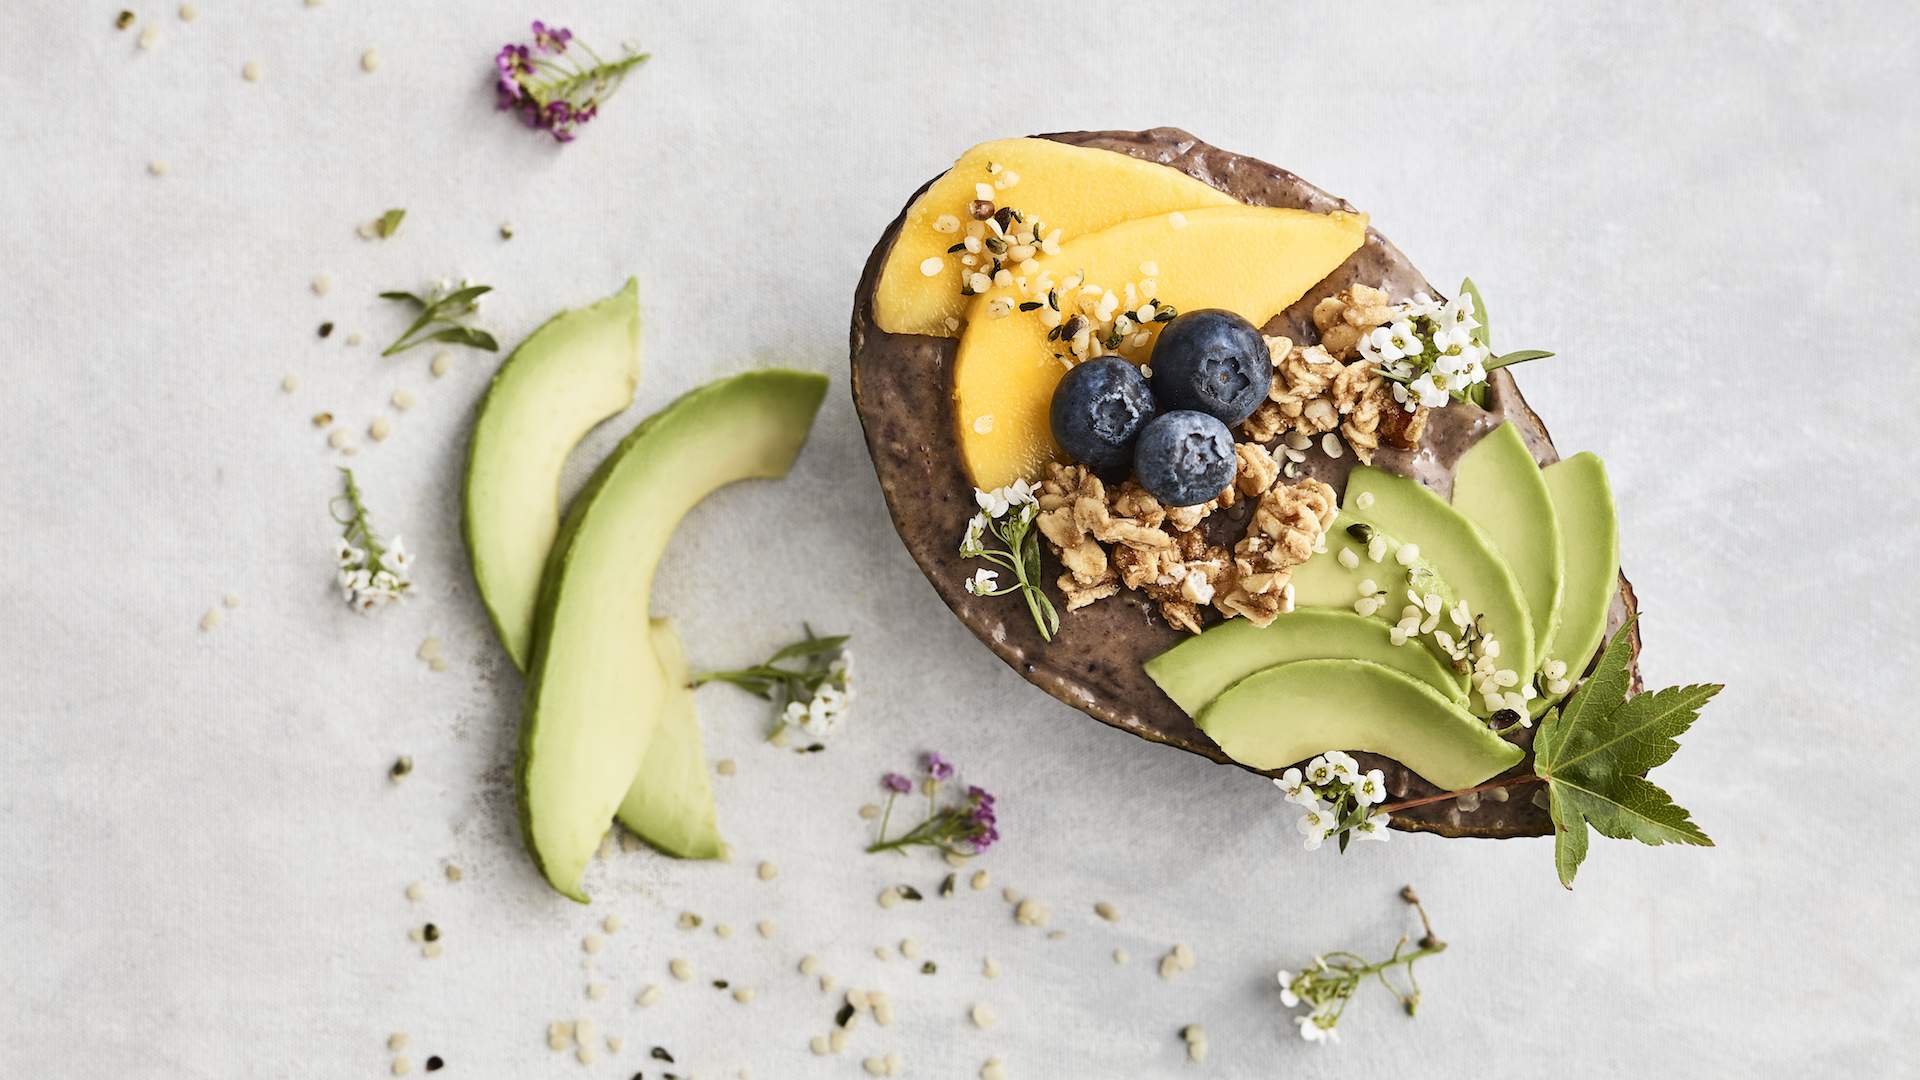 Australia's First Ever Avocado Cafe Is Popping Up in Sydney